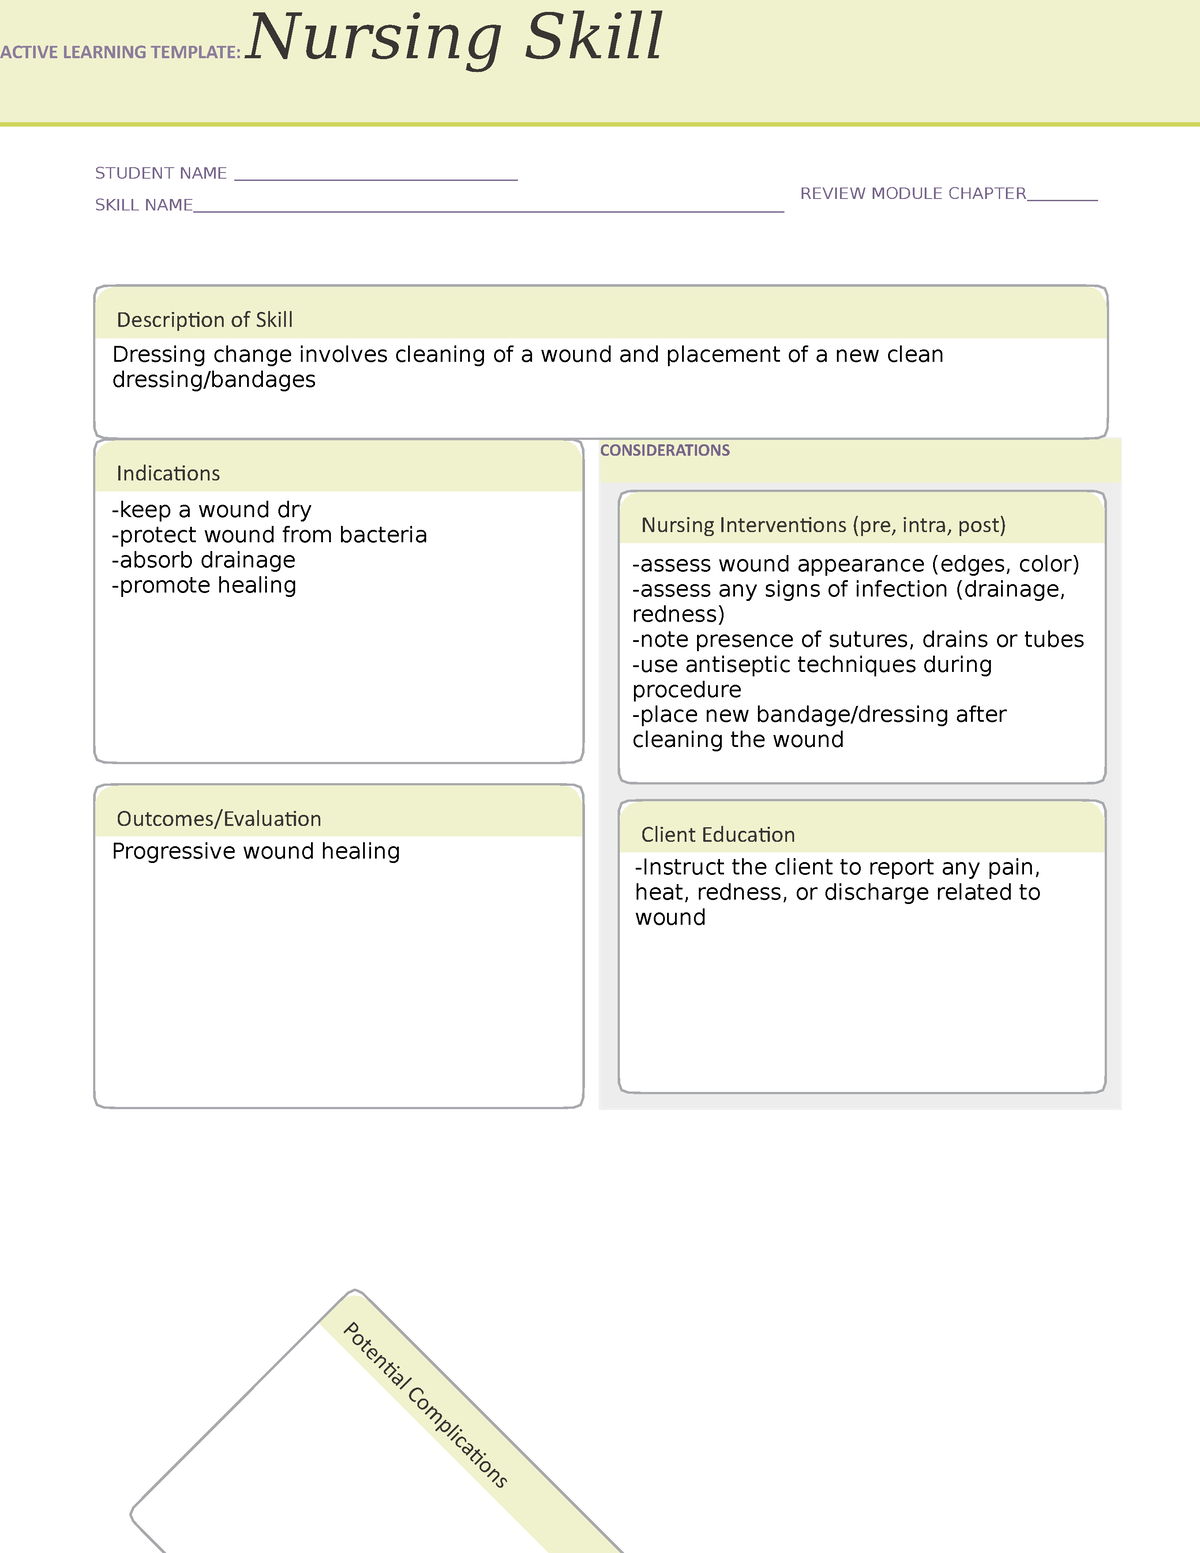 ATI skills template Dressing change ACTIVE LEARNING TEMPLATE